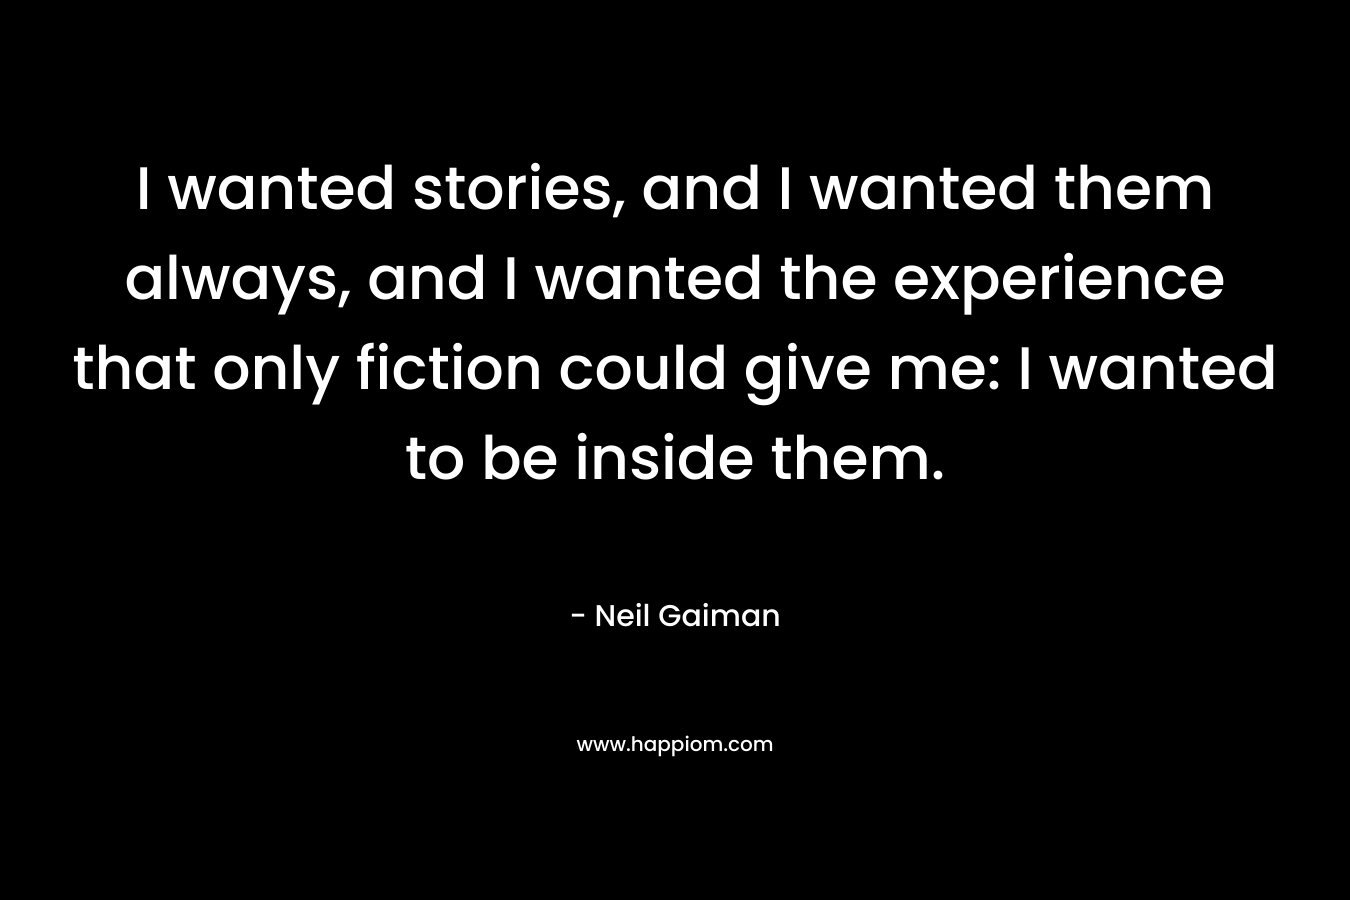 I wanted stories, and I wanted them always, and I wanted the experience that only fiction could give me: I wanted to be inside them.